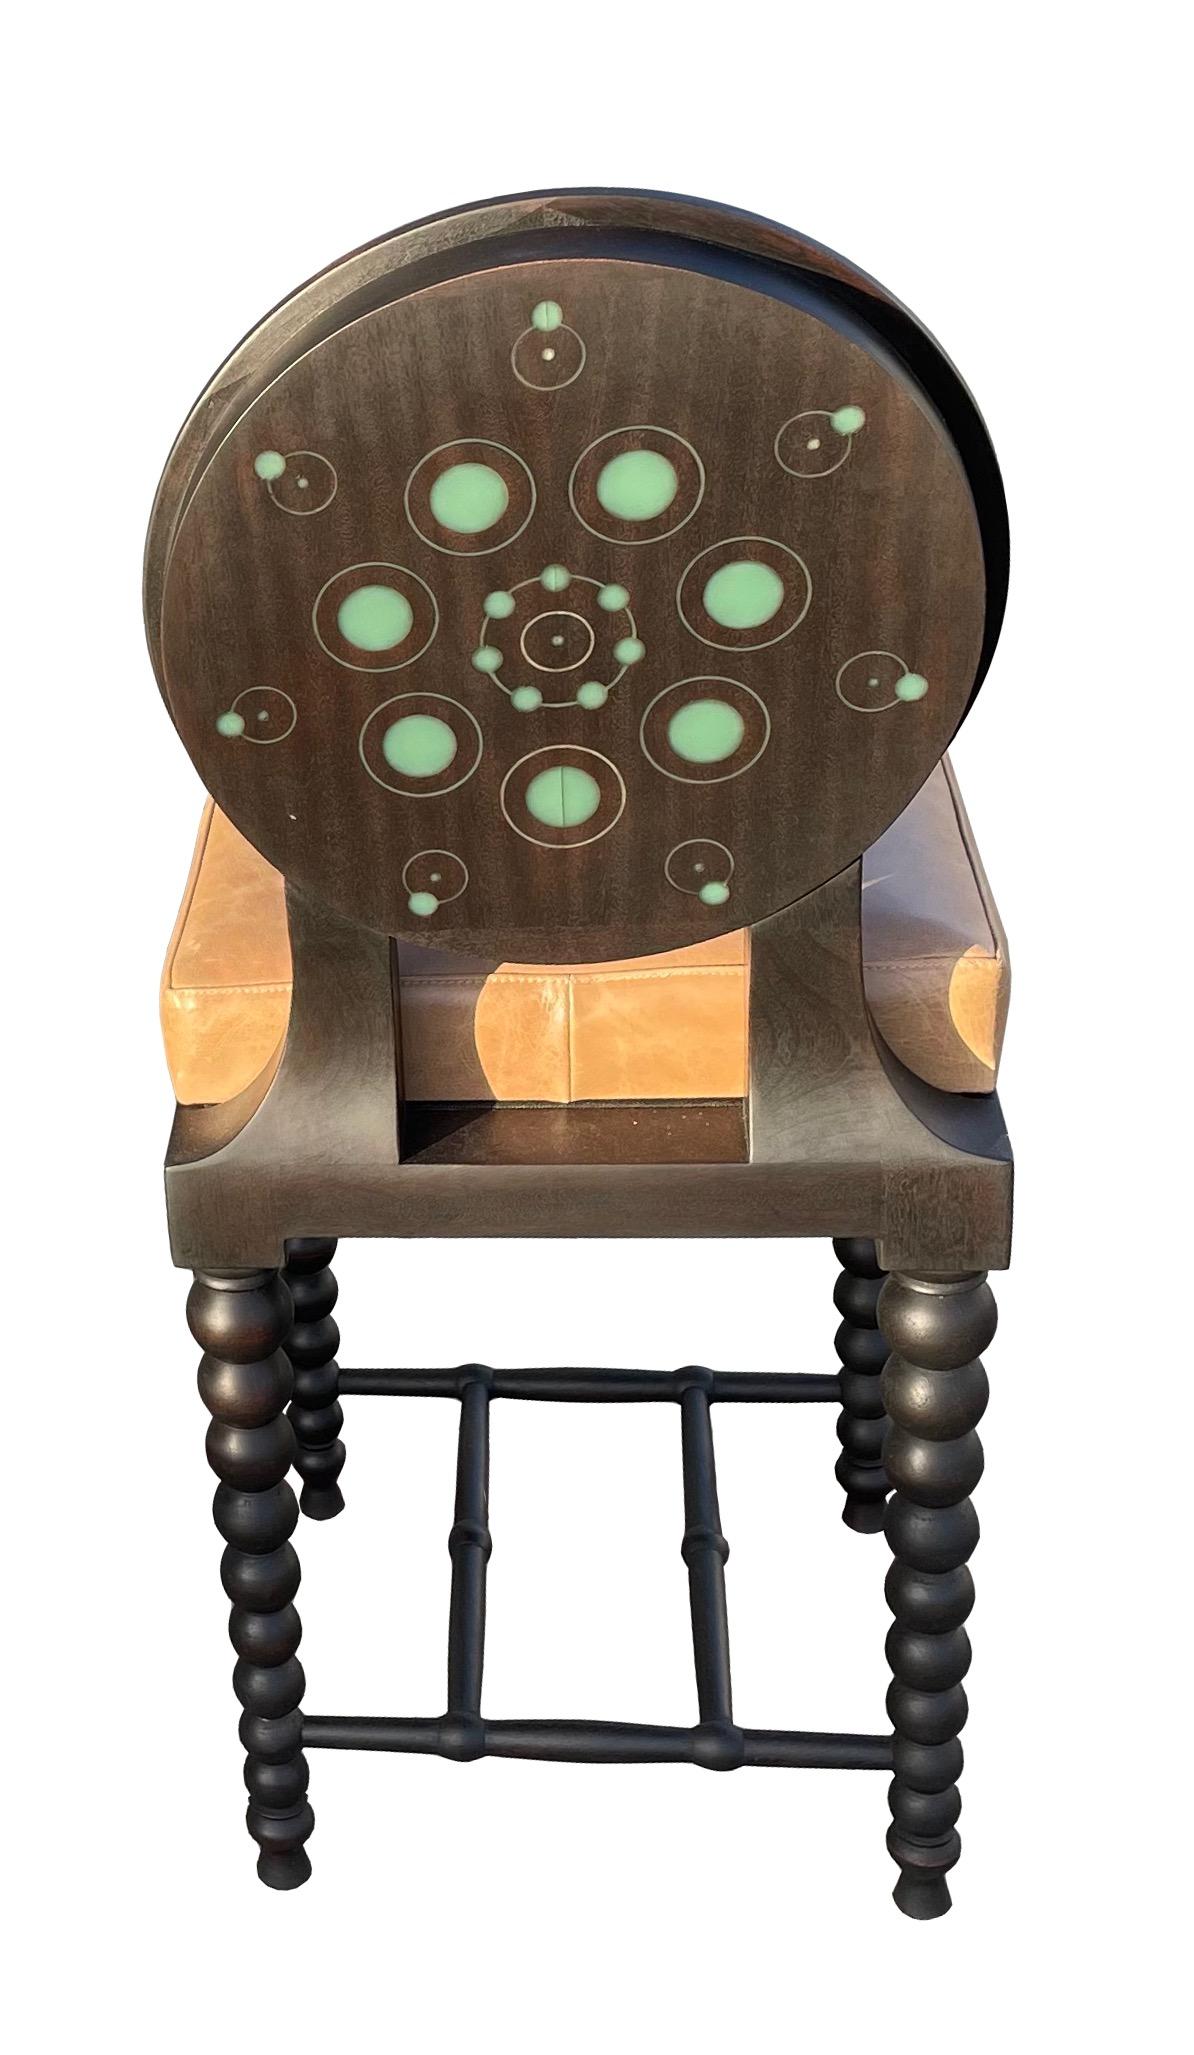 The Colloquy Cathedral Chairs title was born of the idea to create seating bathed in the hushed light of a gothic cathedral rose window. 
